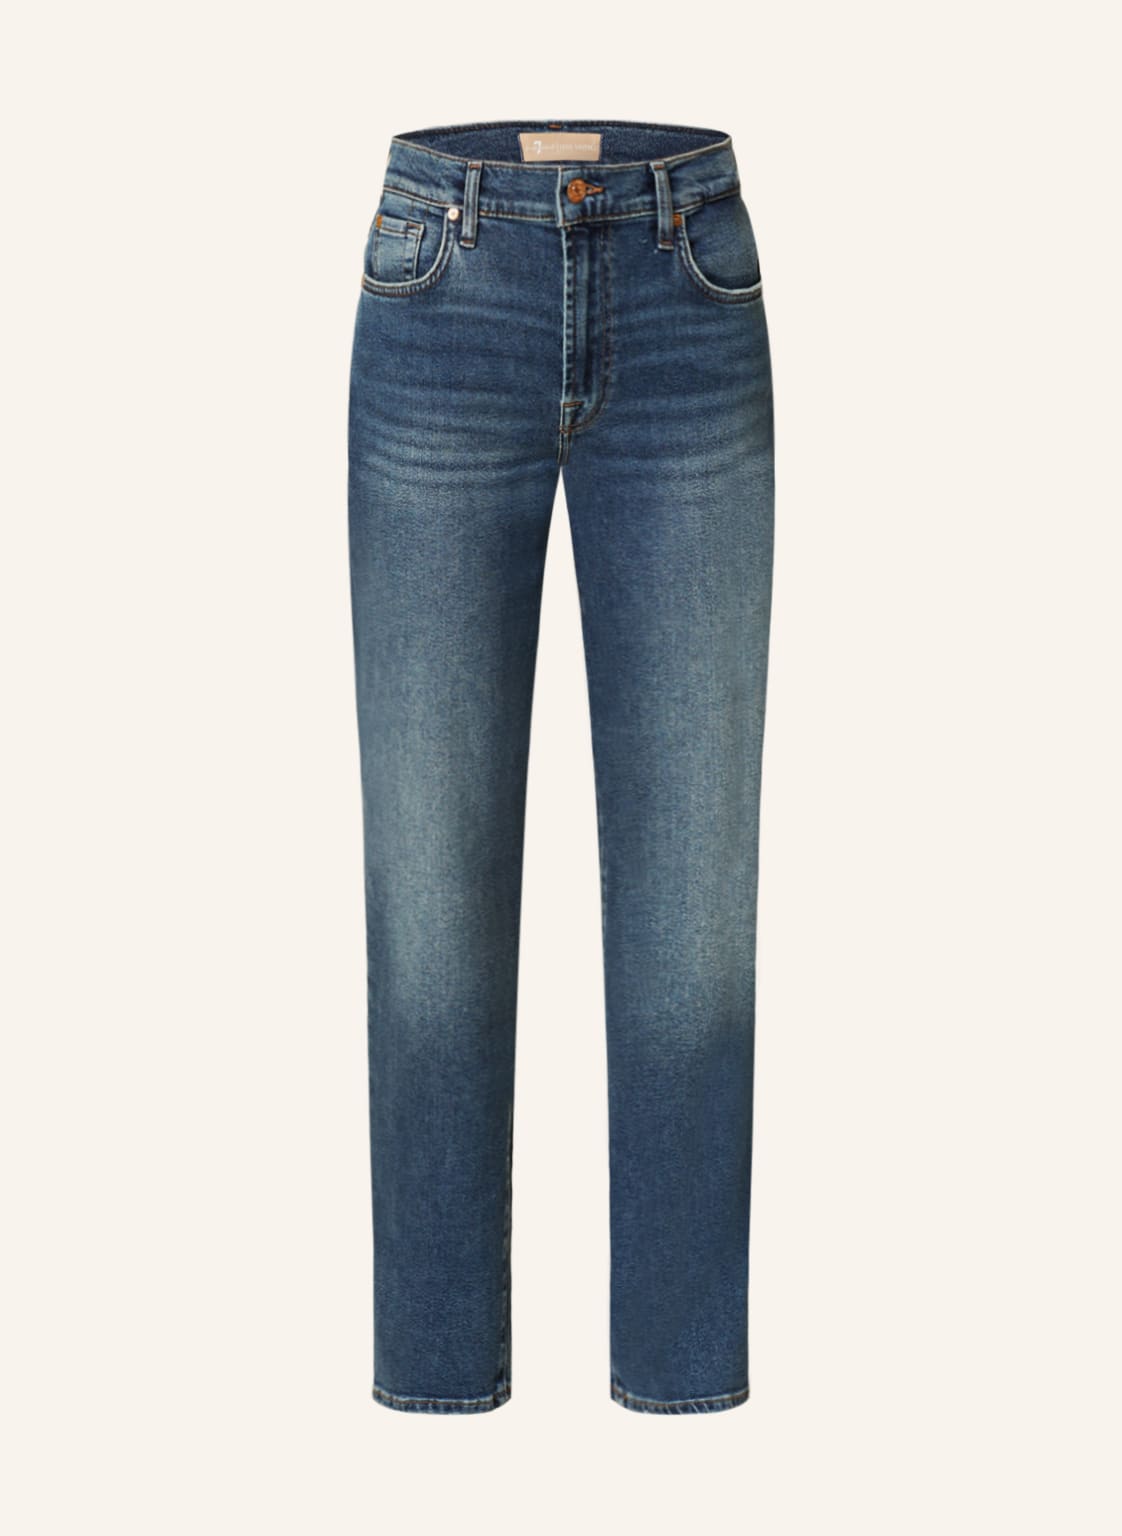 7 For All Mankind Straight Jeans Ellie blau von 7 For All Mankind